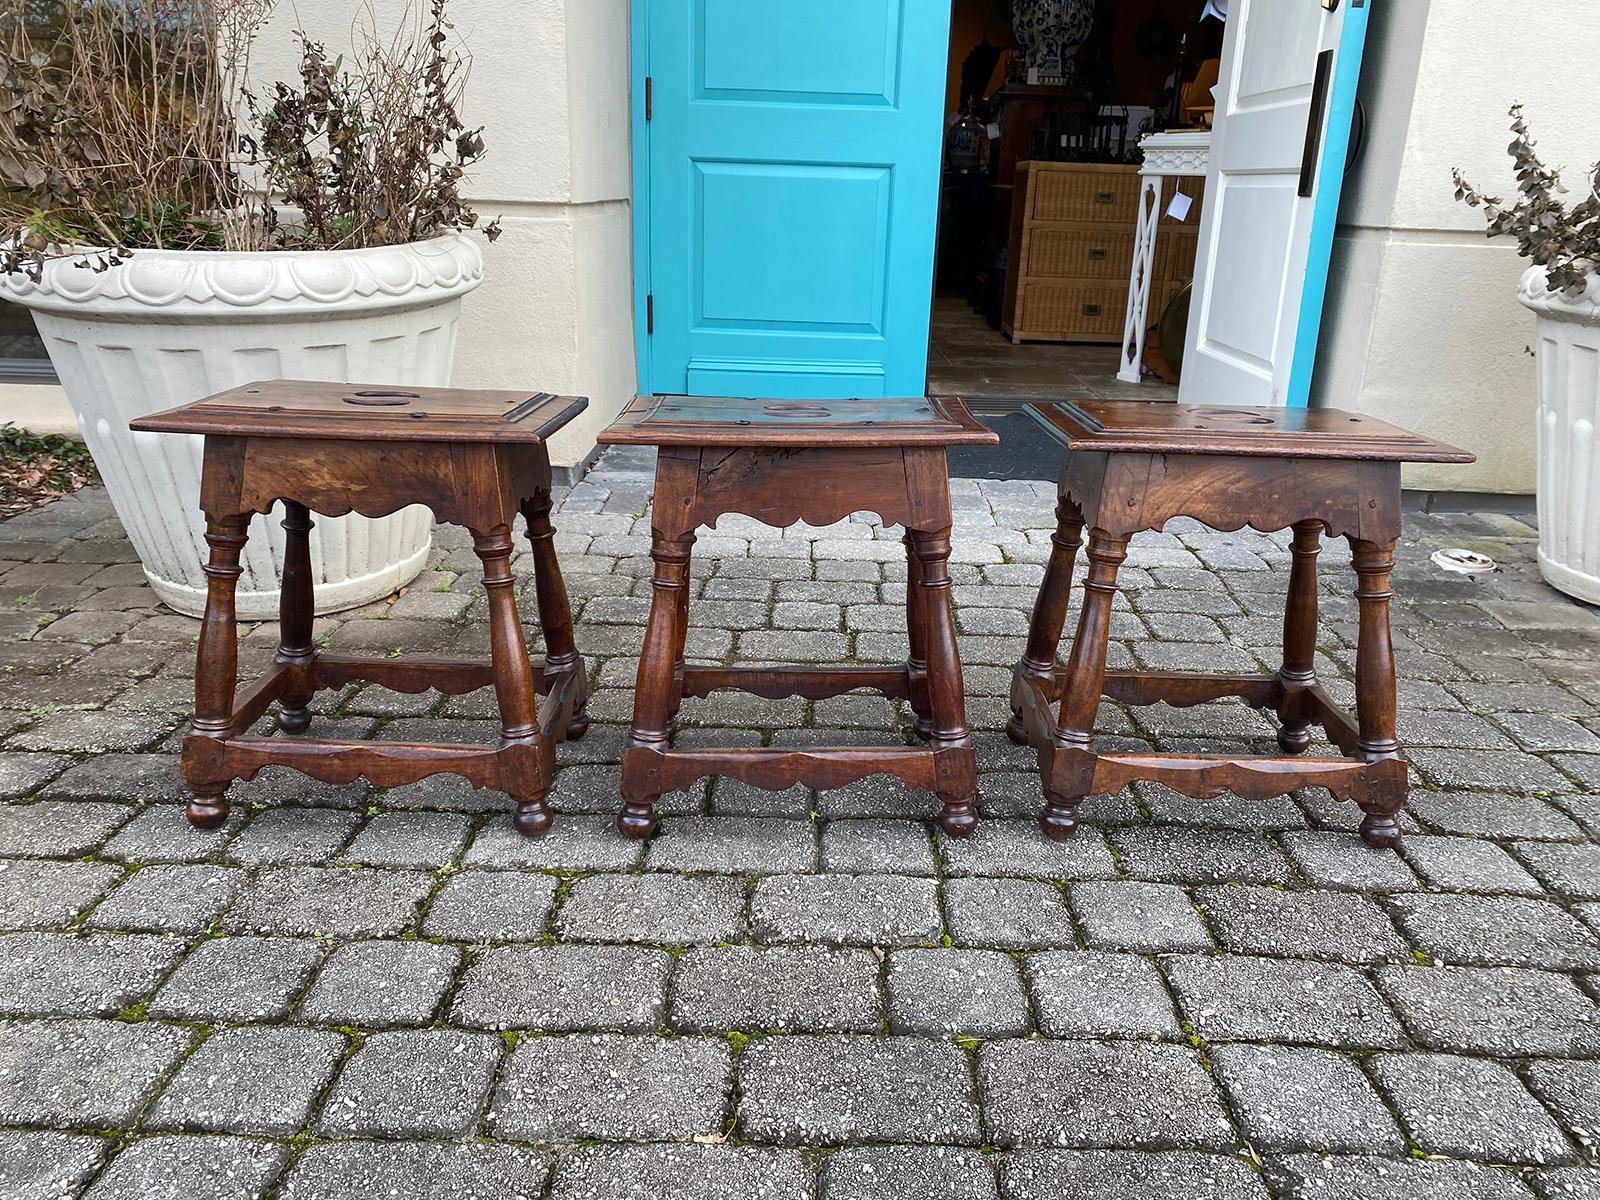 Set of three 20th century English joint stools
Measures: Left: 17.25